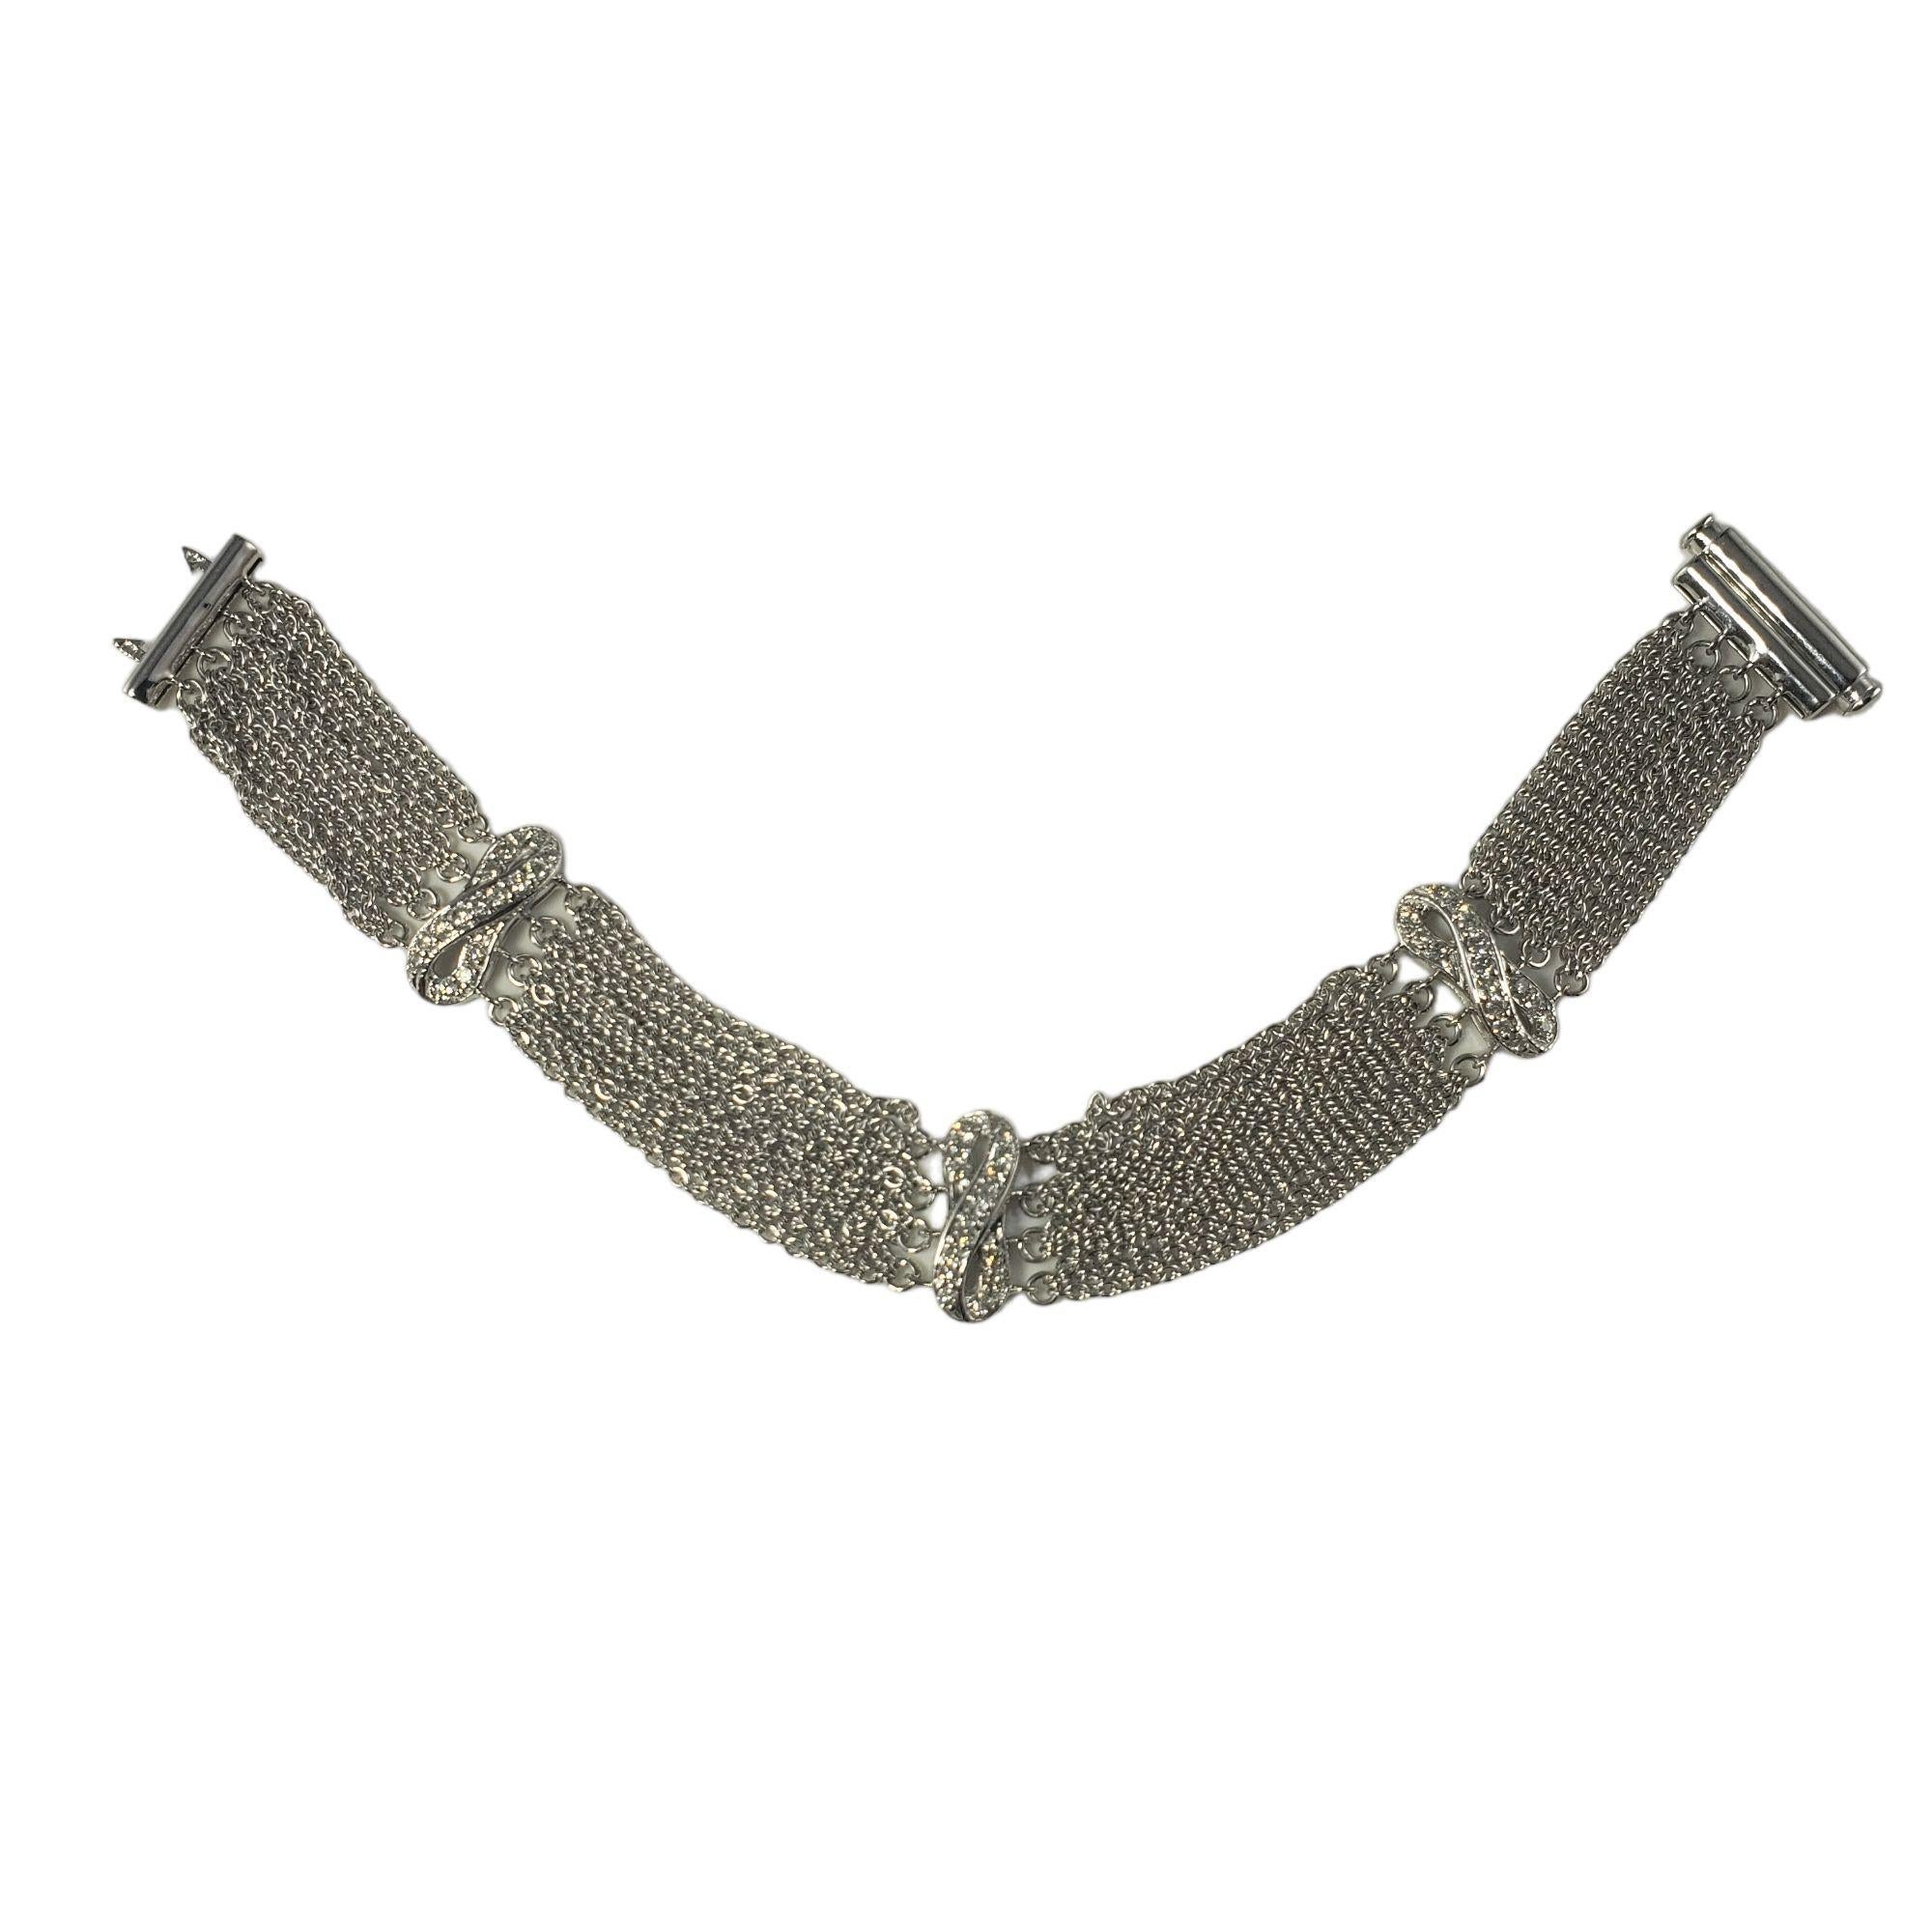 Vintage 14 Karat White Gold and Diamond Bracelet-

This sparkling bracelet features 45 round brilliant cut diamonds set in beautifully detailed 14K white gold. Width: 15 mm.

Approximate total diamond weight: .90 ct.

Diamond clarity: